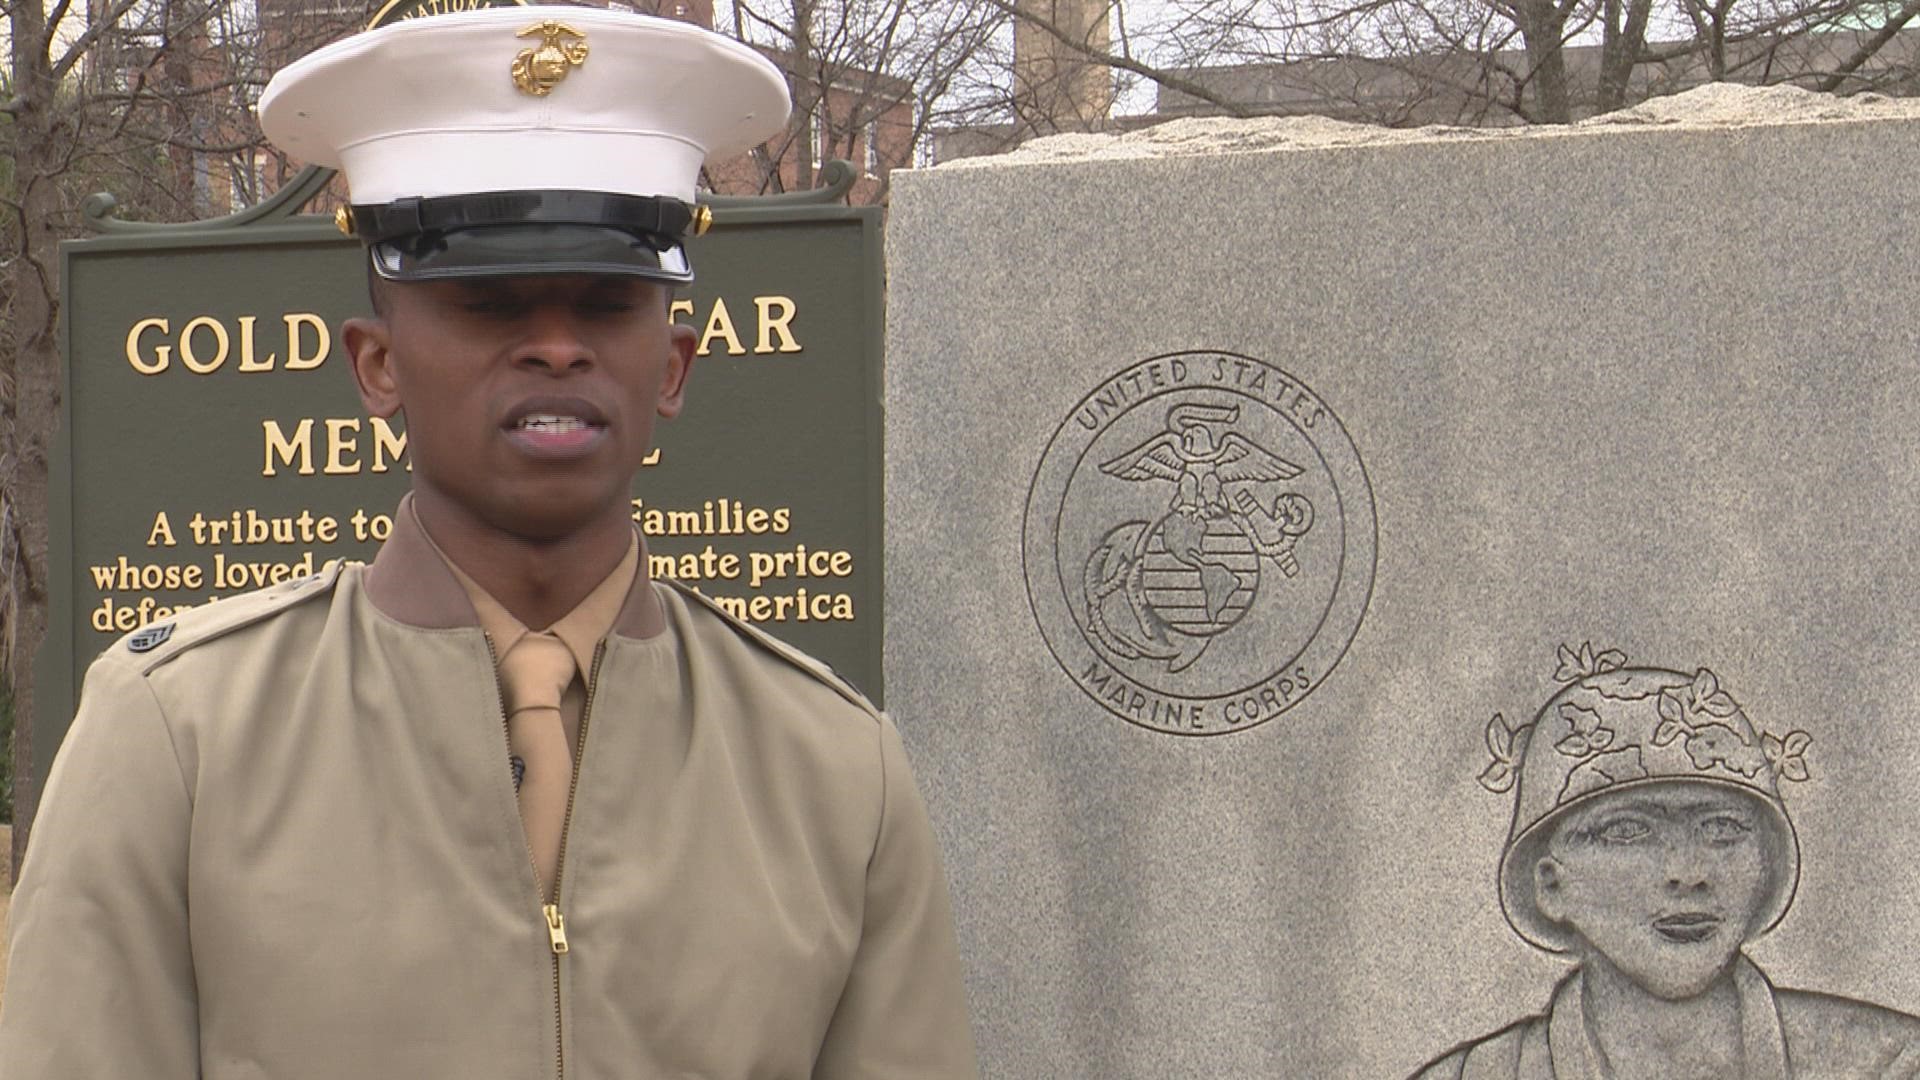 Both men agree that the Montford Point Marines set the sites for how far they can go.